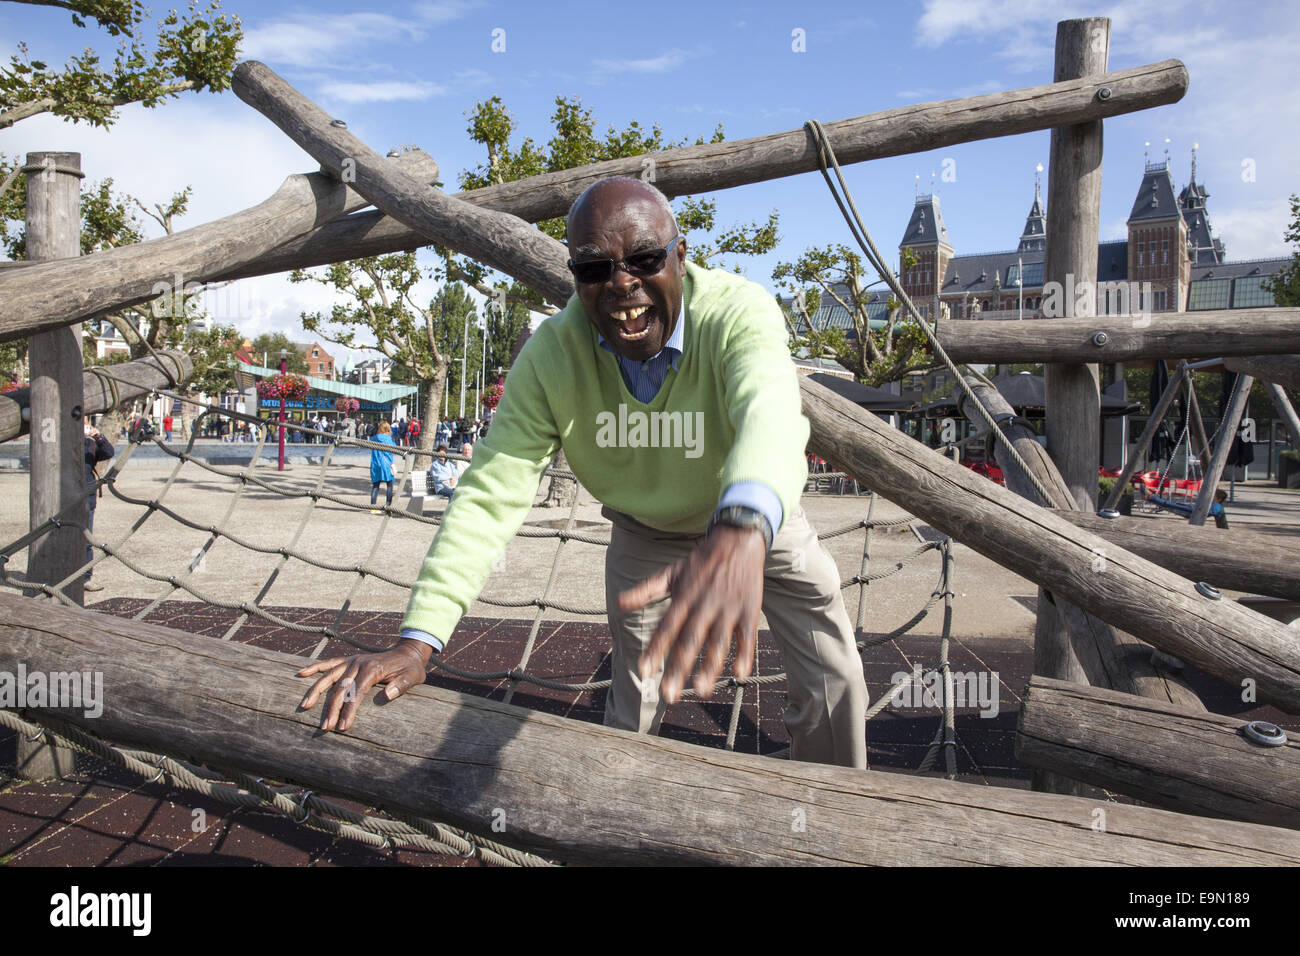 Man has a childlike moment on a playground in Amsterdam, Netherlands. Stock Photo